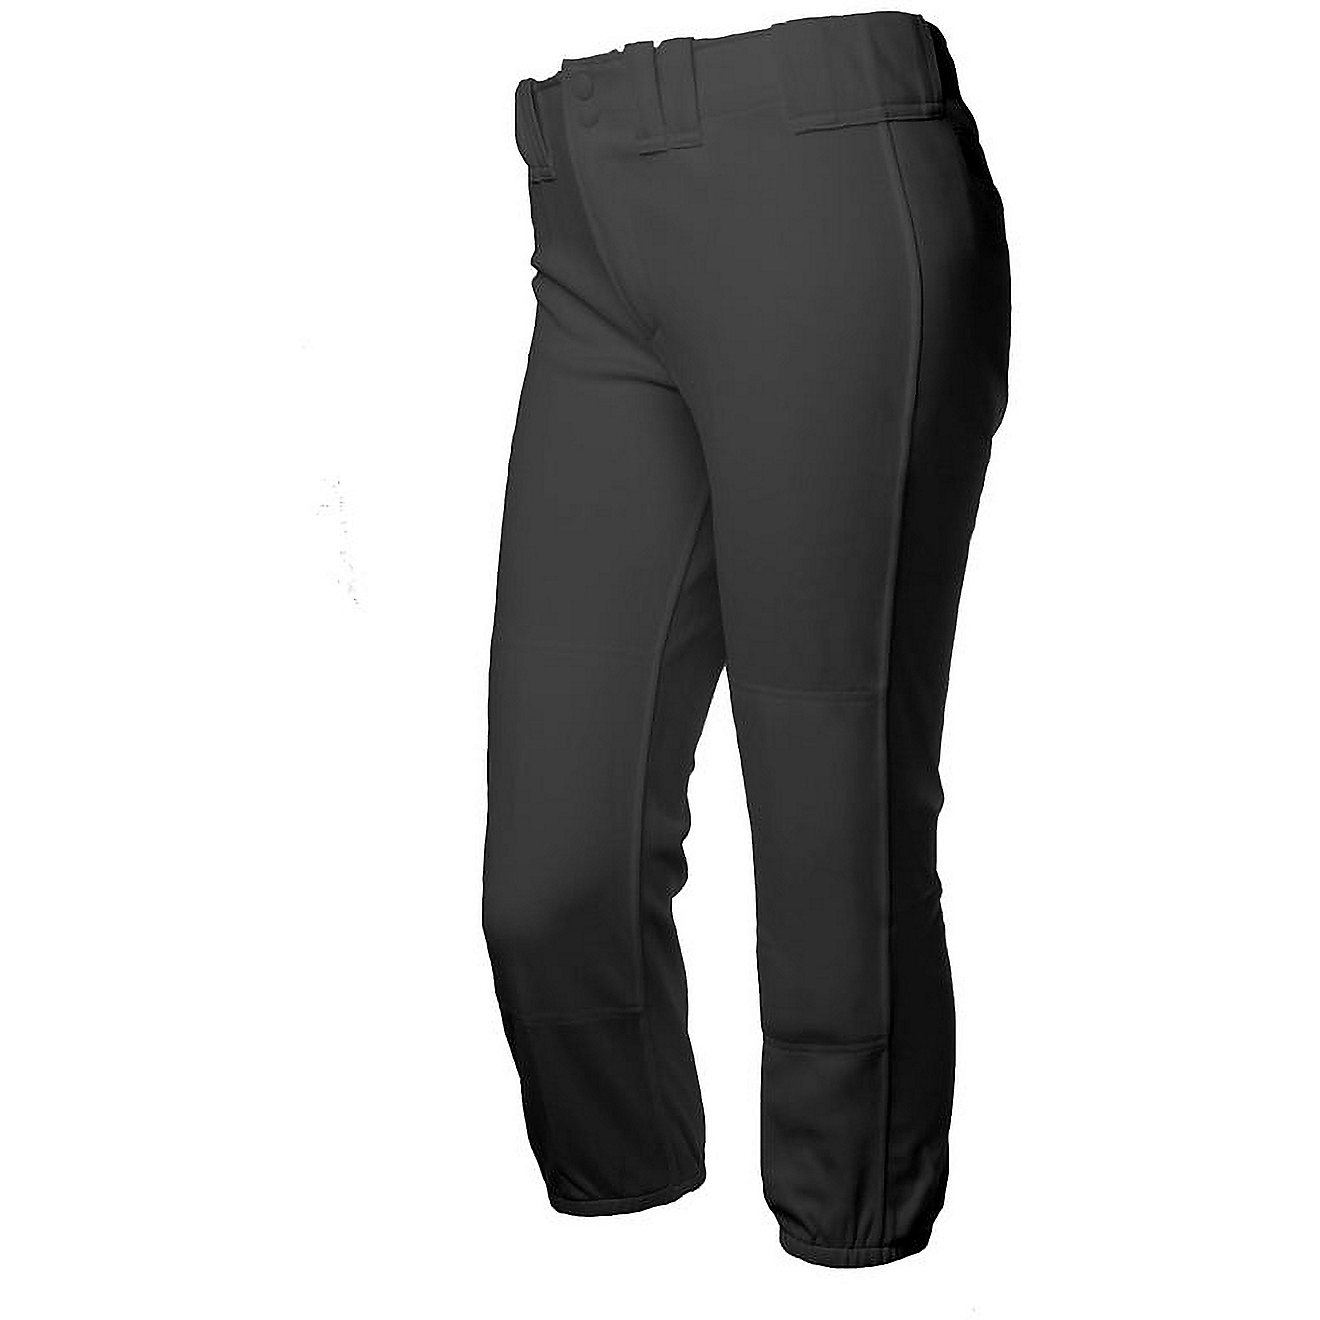 RIP-IT Women's 4-Way Stretch Softball Pants                                                                                      - view number 1